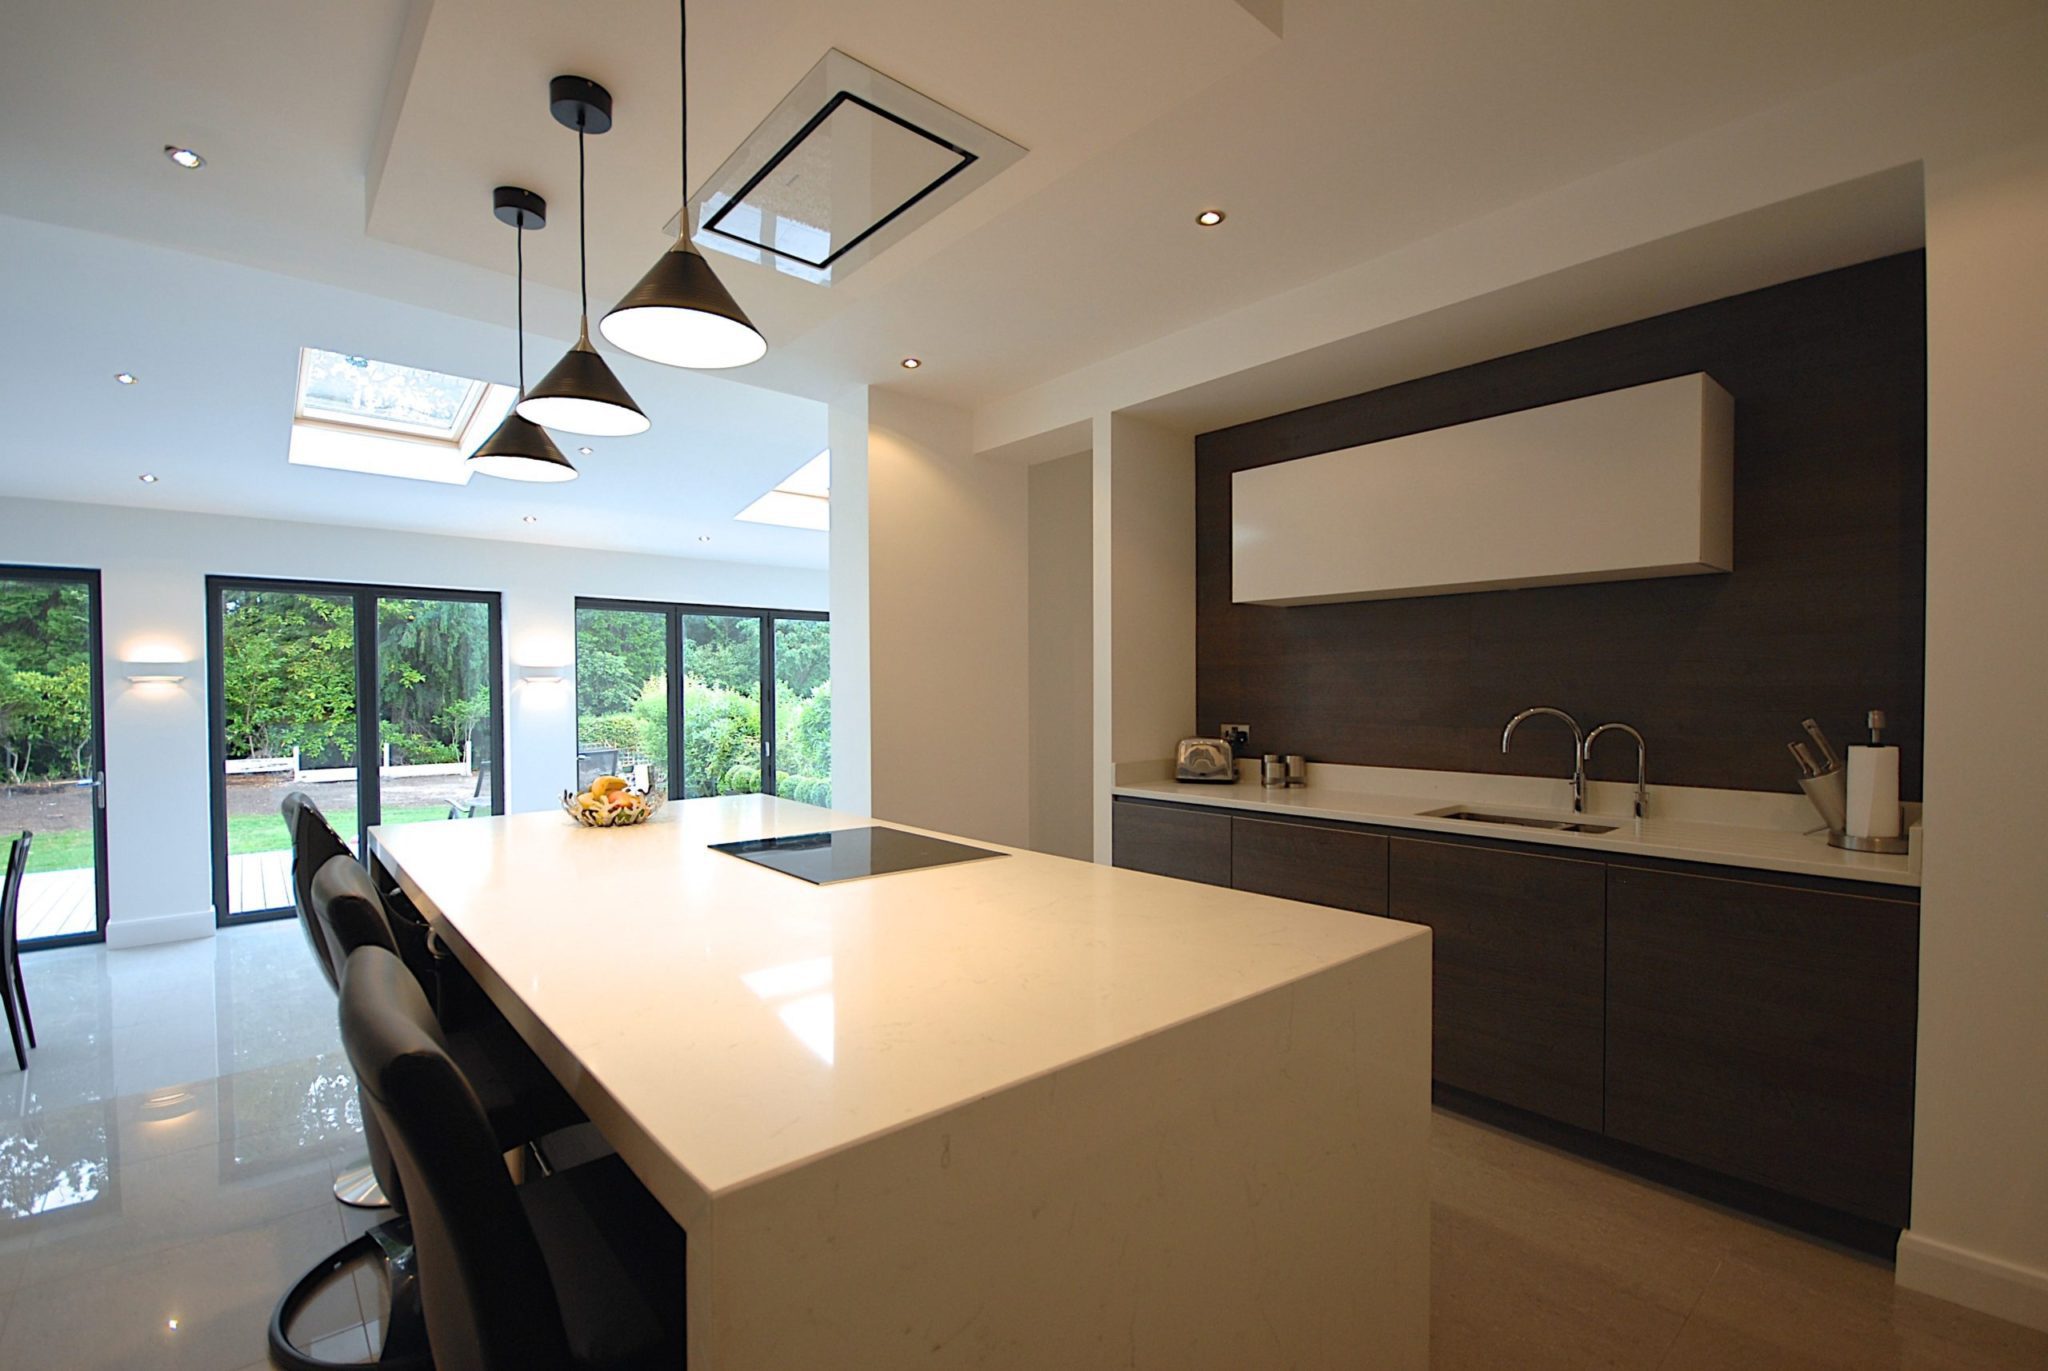 a modern kitchen with a large kitchen island and bar stools.